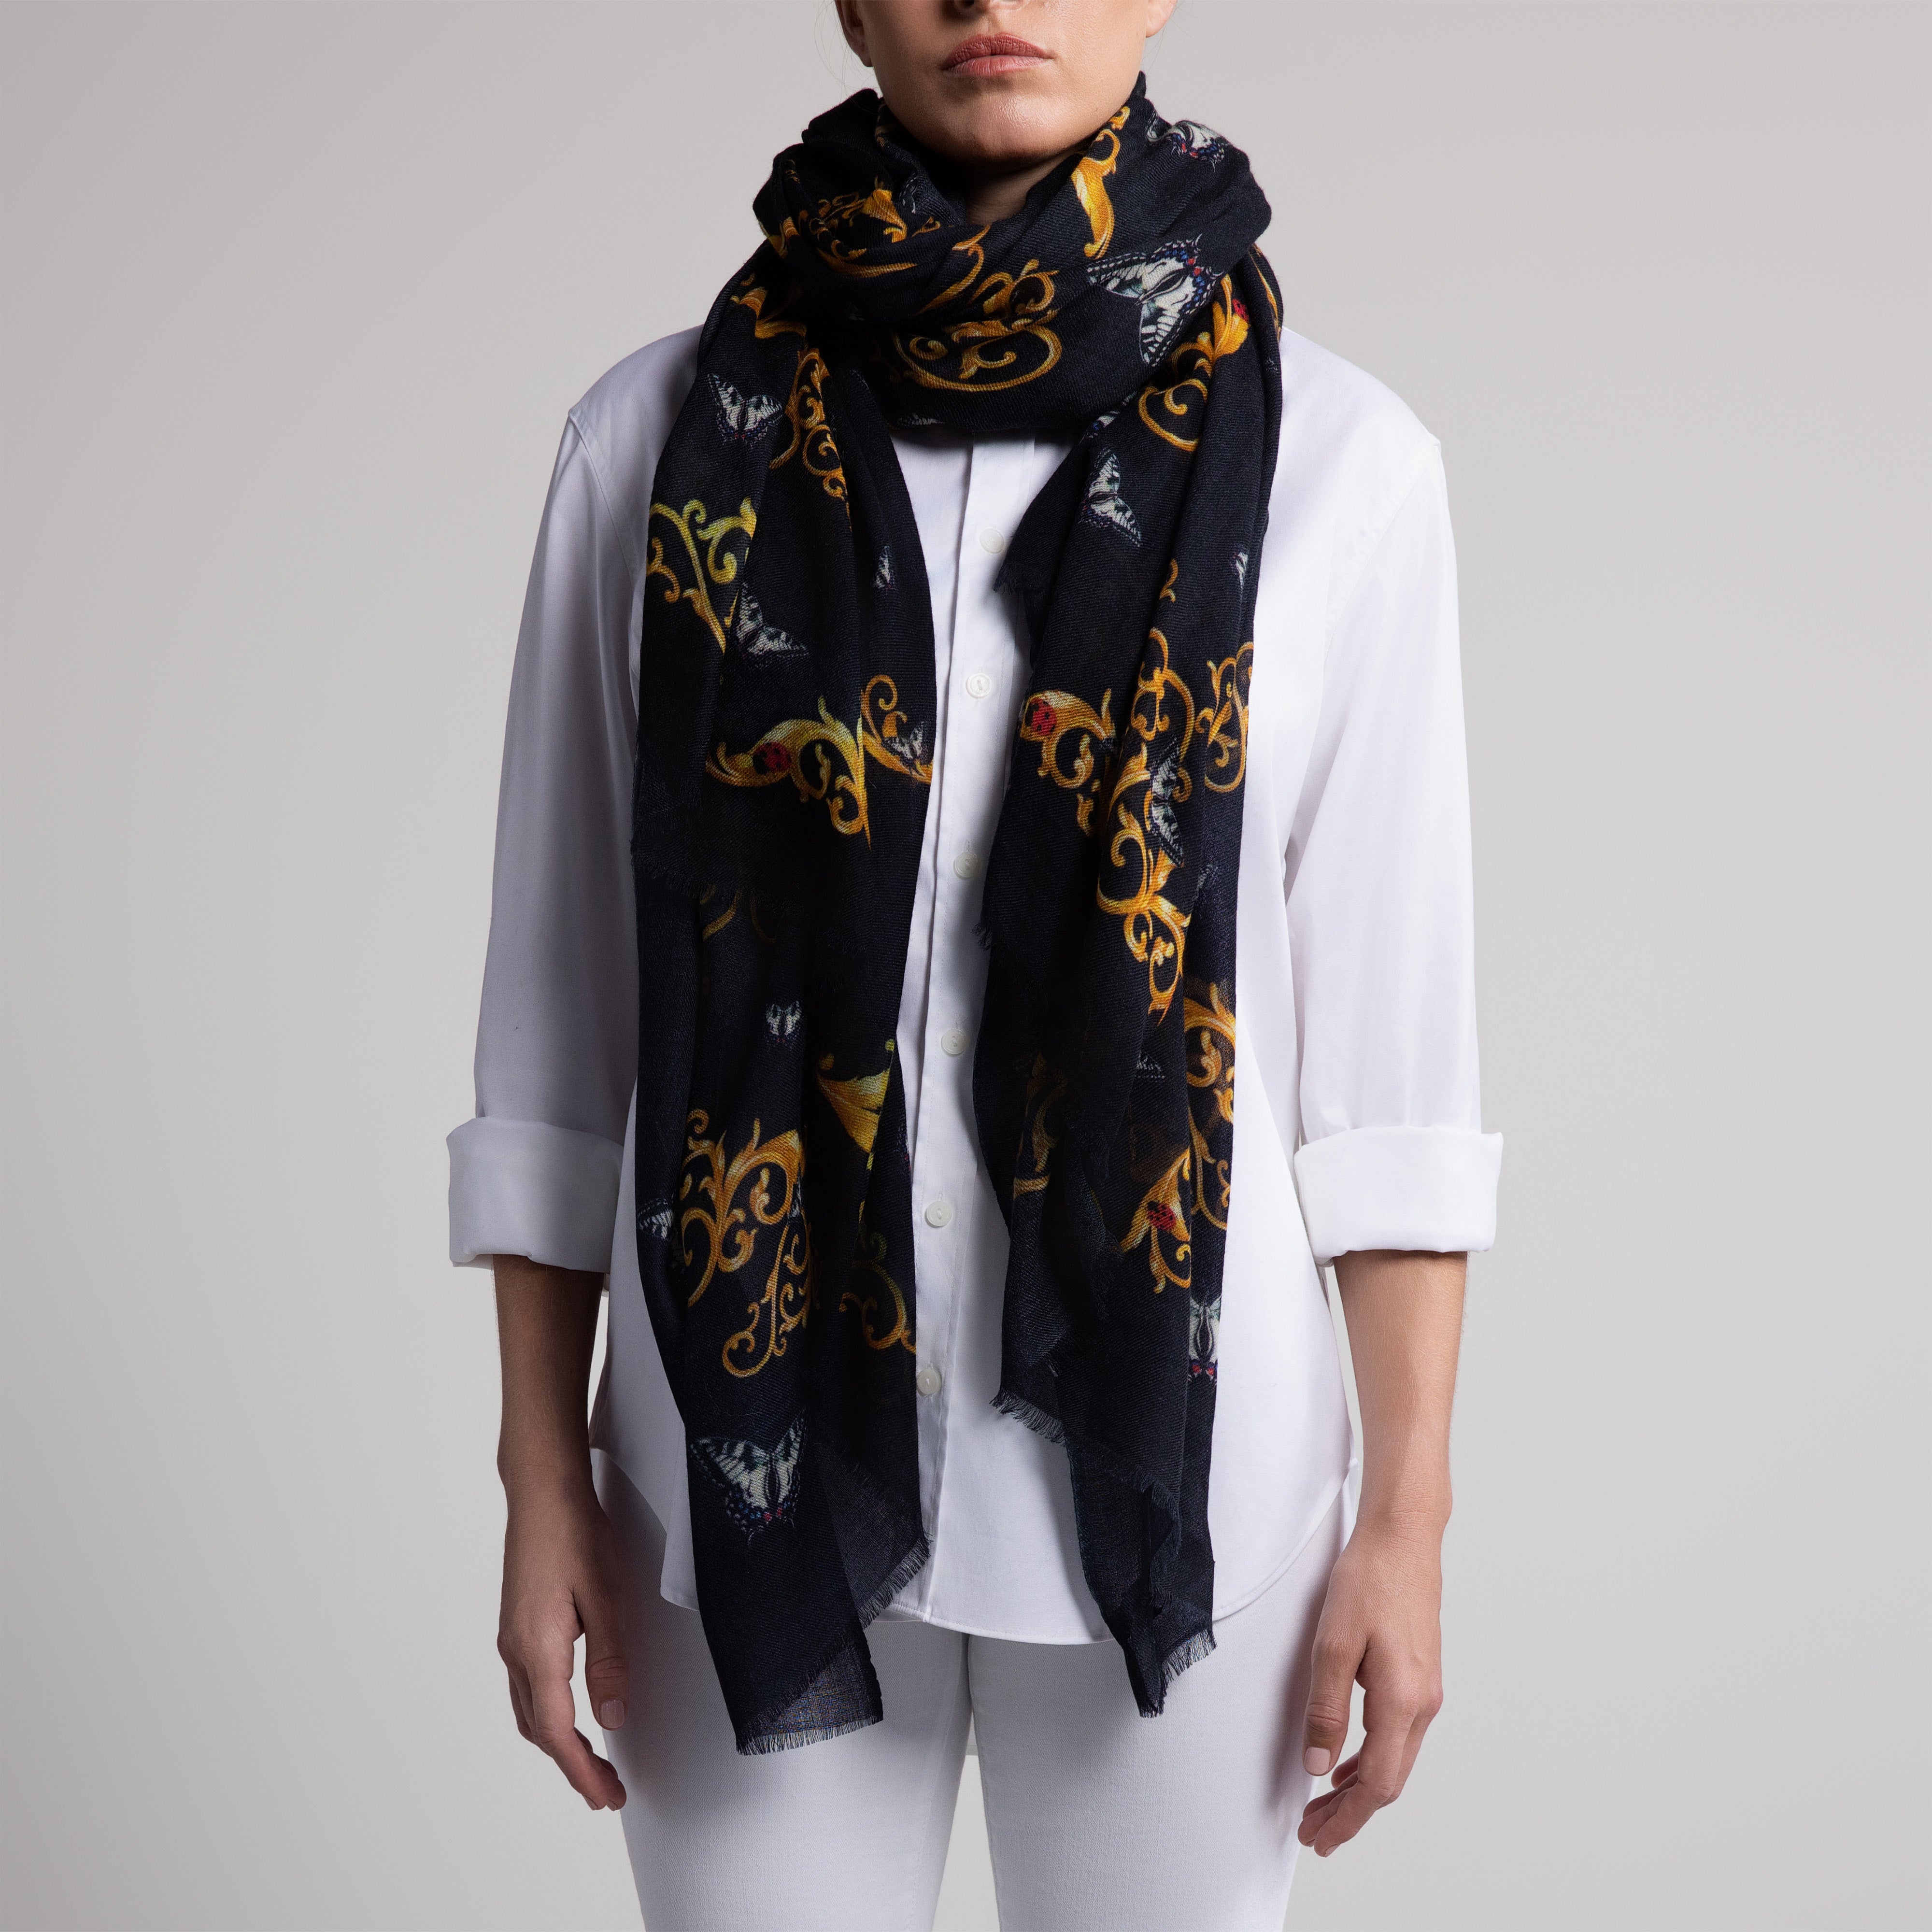 Butterfly & Baroque 100% Cashmere Scarf in Black